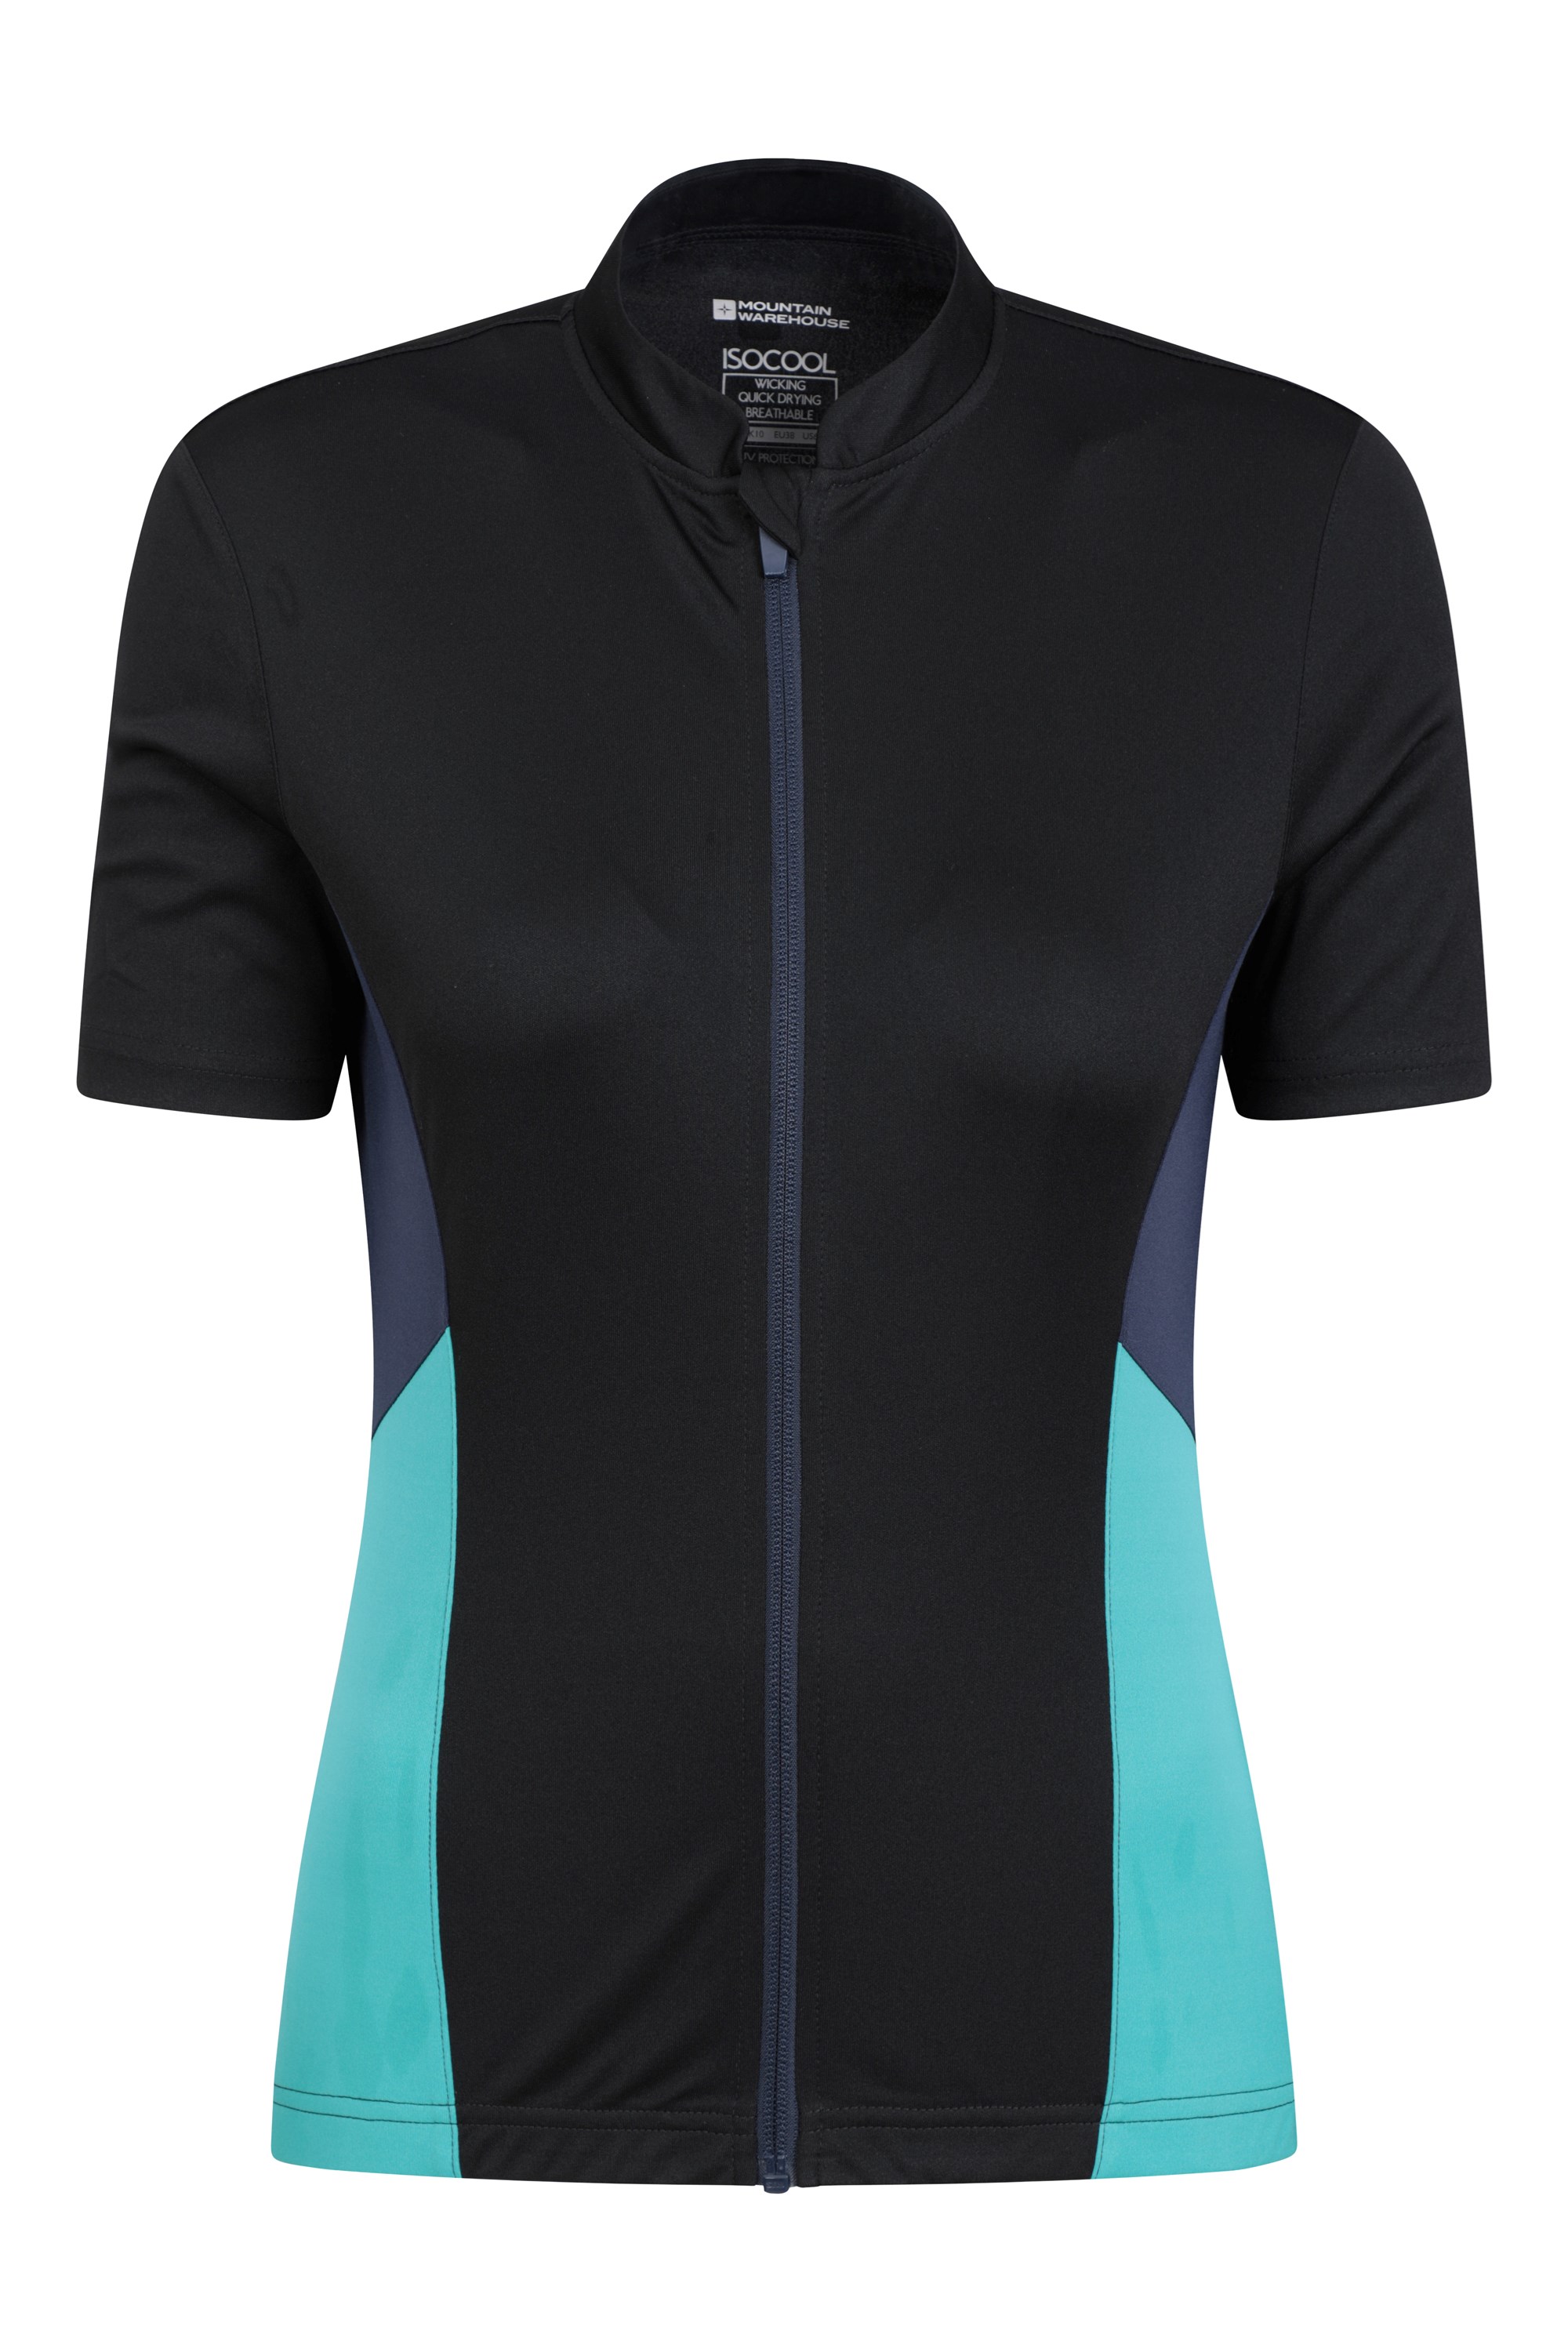 Energize Womens Cycle T-Shirt Navy